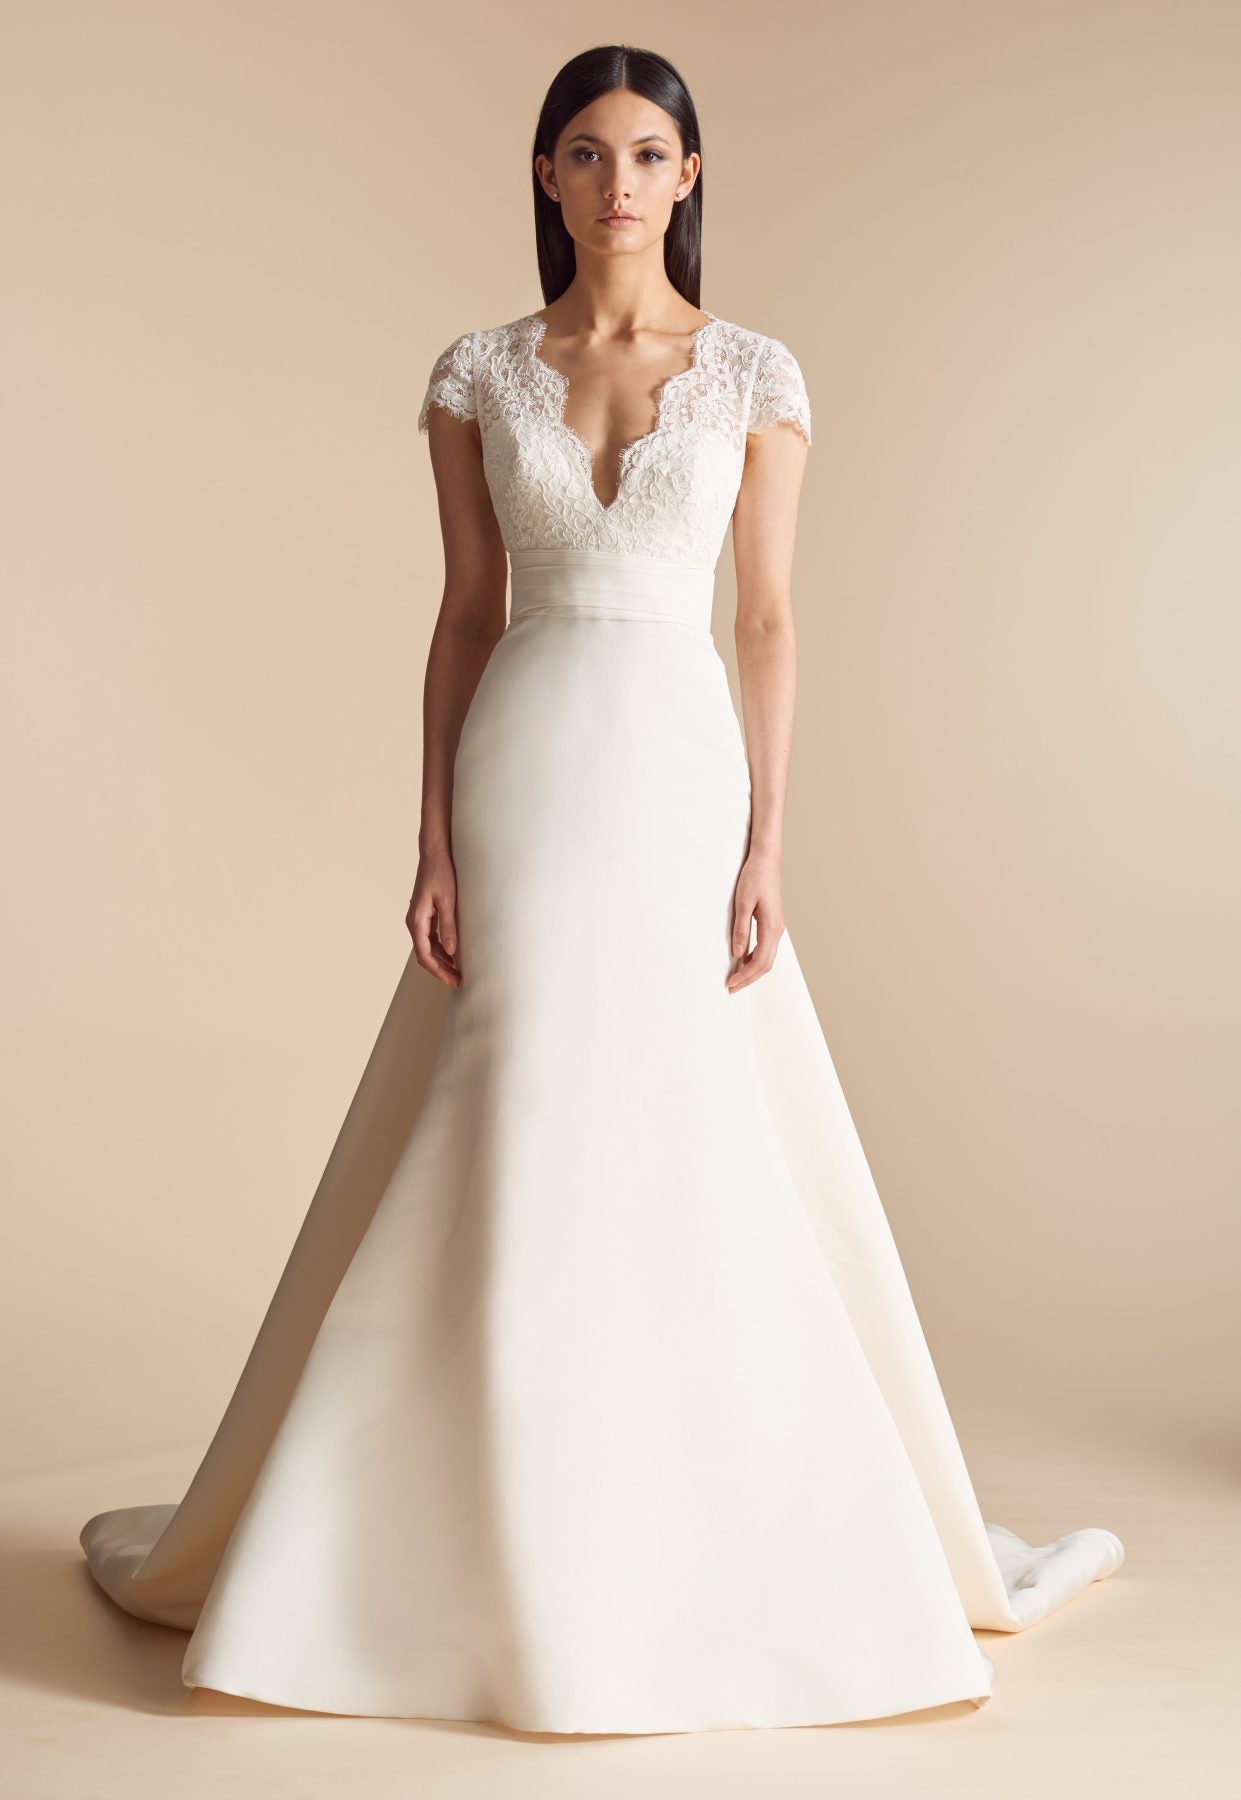 allison-webb-fit-and-flare-wedding-dress-with-lace-bodice-and-v-neckline-33741174-1241x1800.jpg